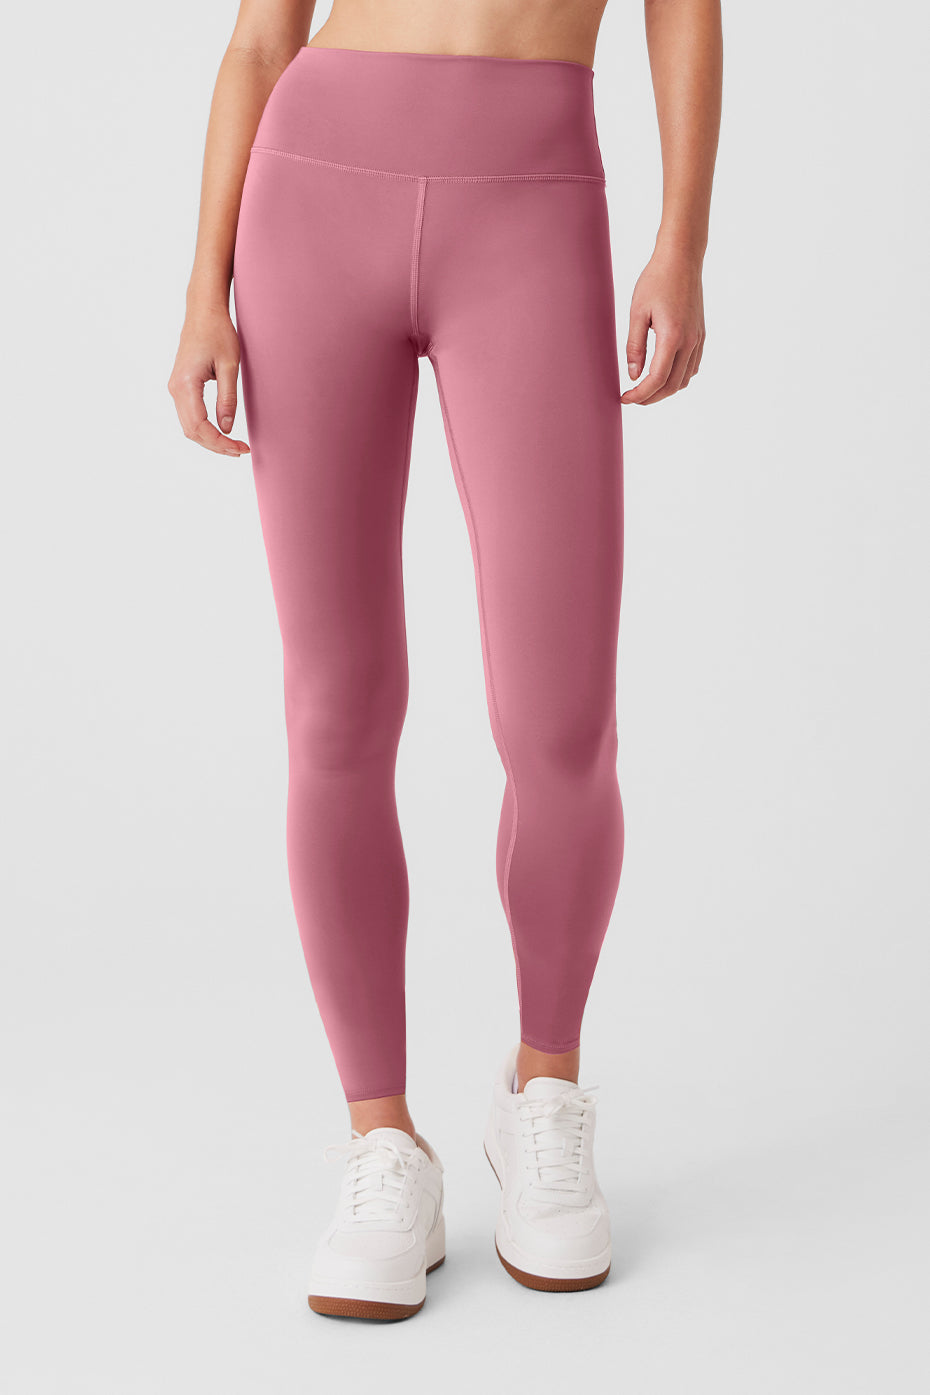 High-Waist Airlift Legging in Dusty Pink by Alo Yoga - International Design  Forum